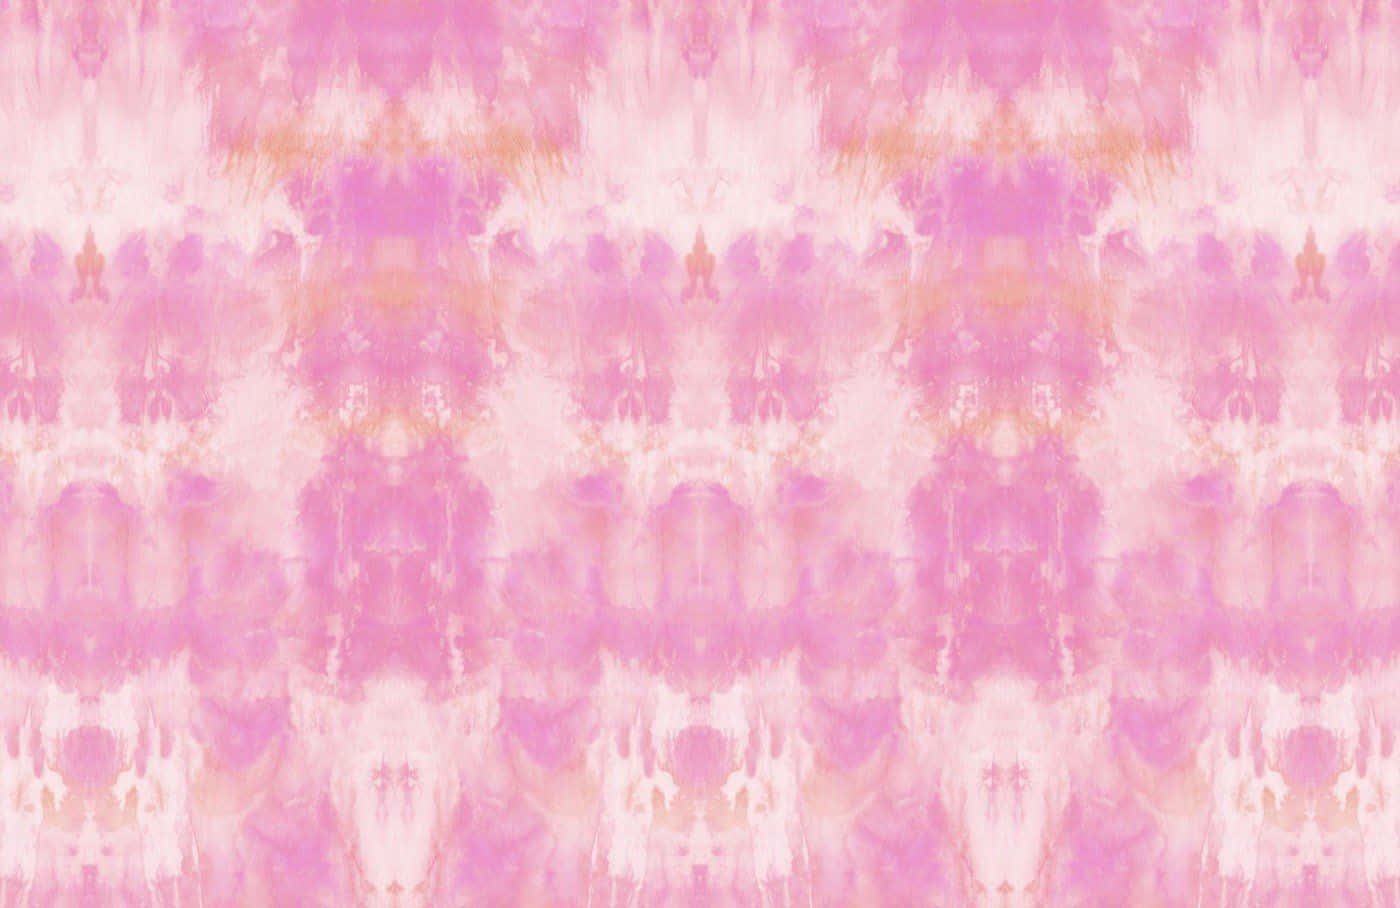 A vibrant tie-dye pattern in shades of pink